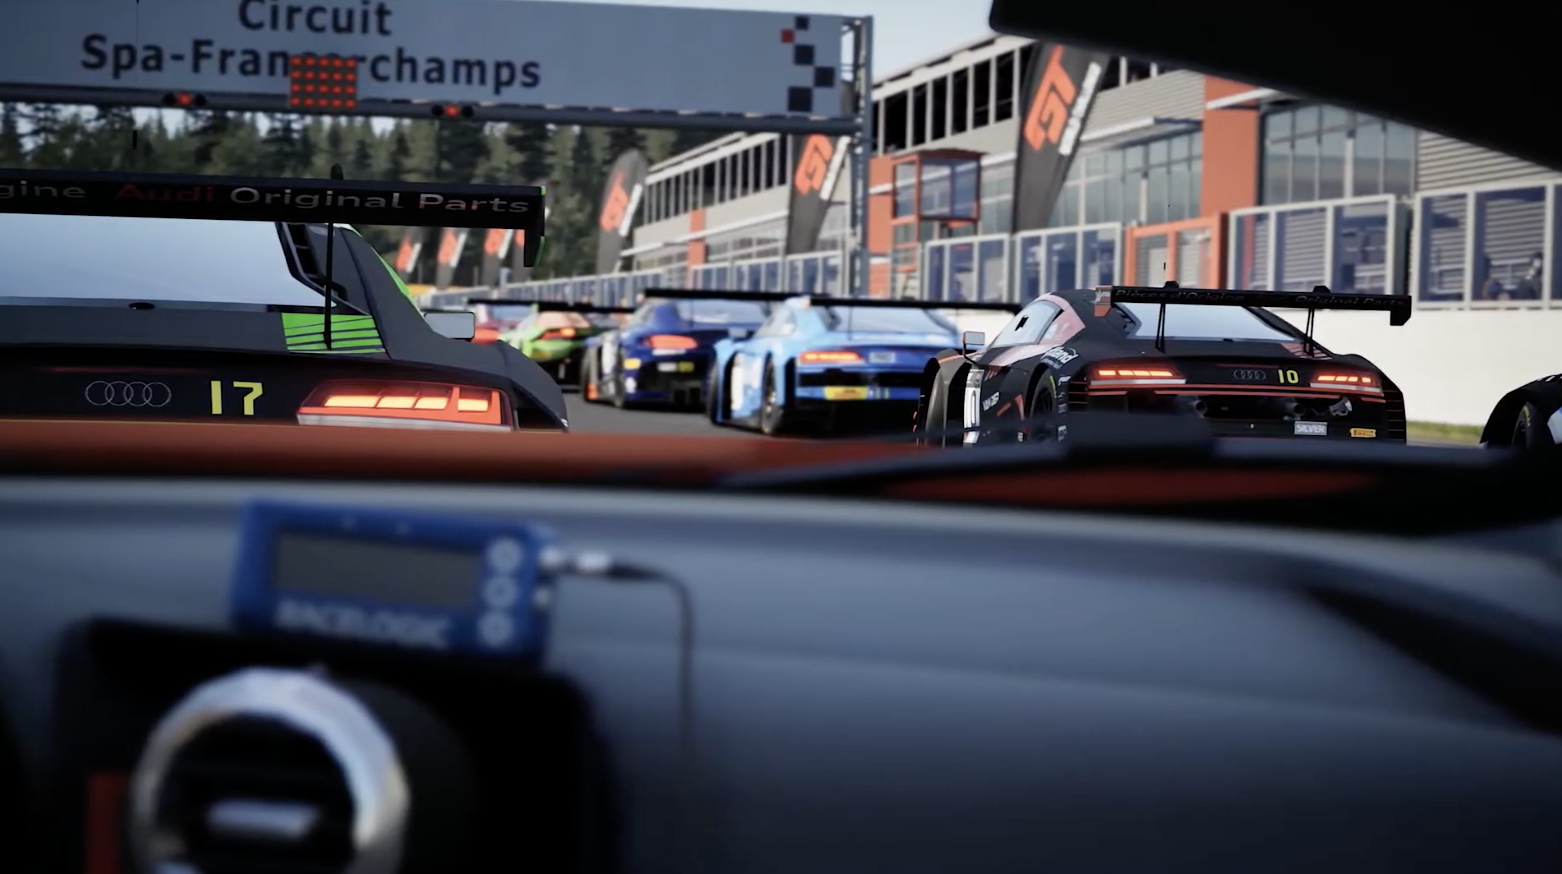 Gaming: Assetto Corsa is coming to PS4 and Xbox One